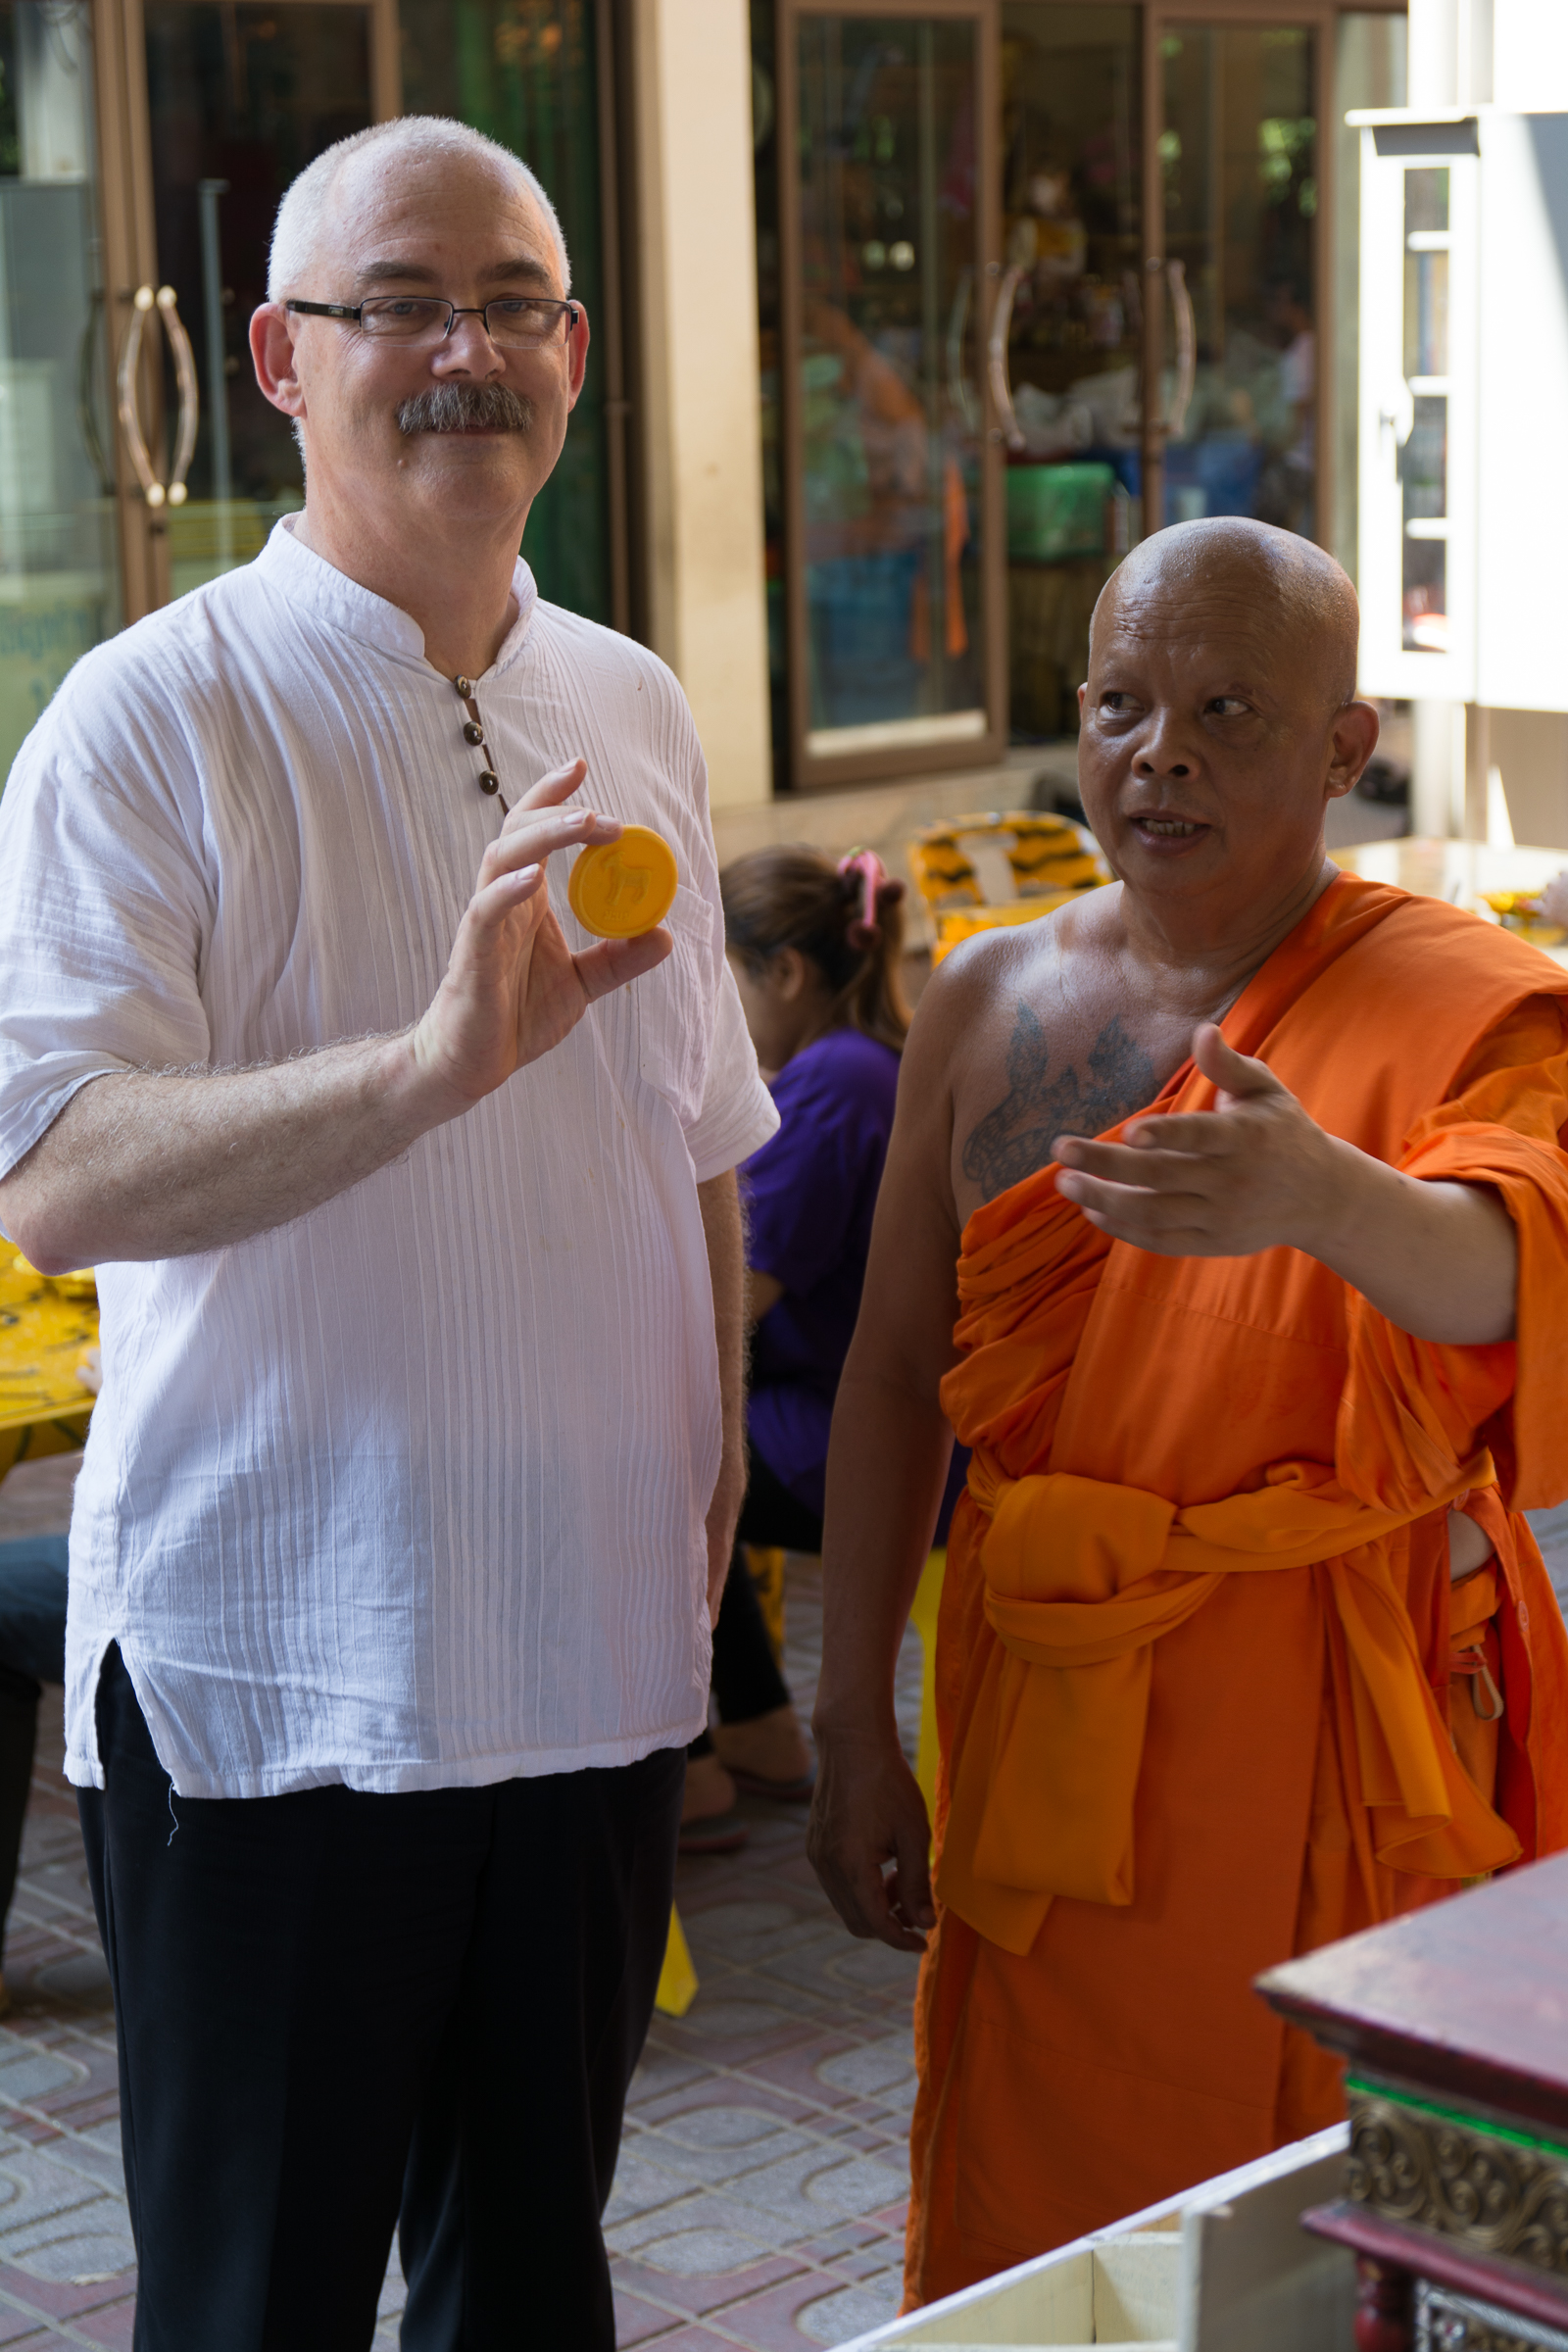 The DGBC delegation were invited by three abbots to visit their monasteries.